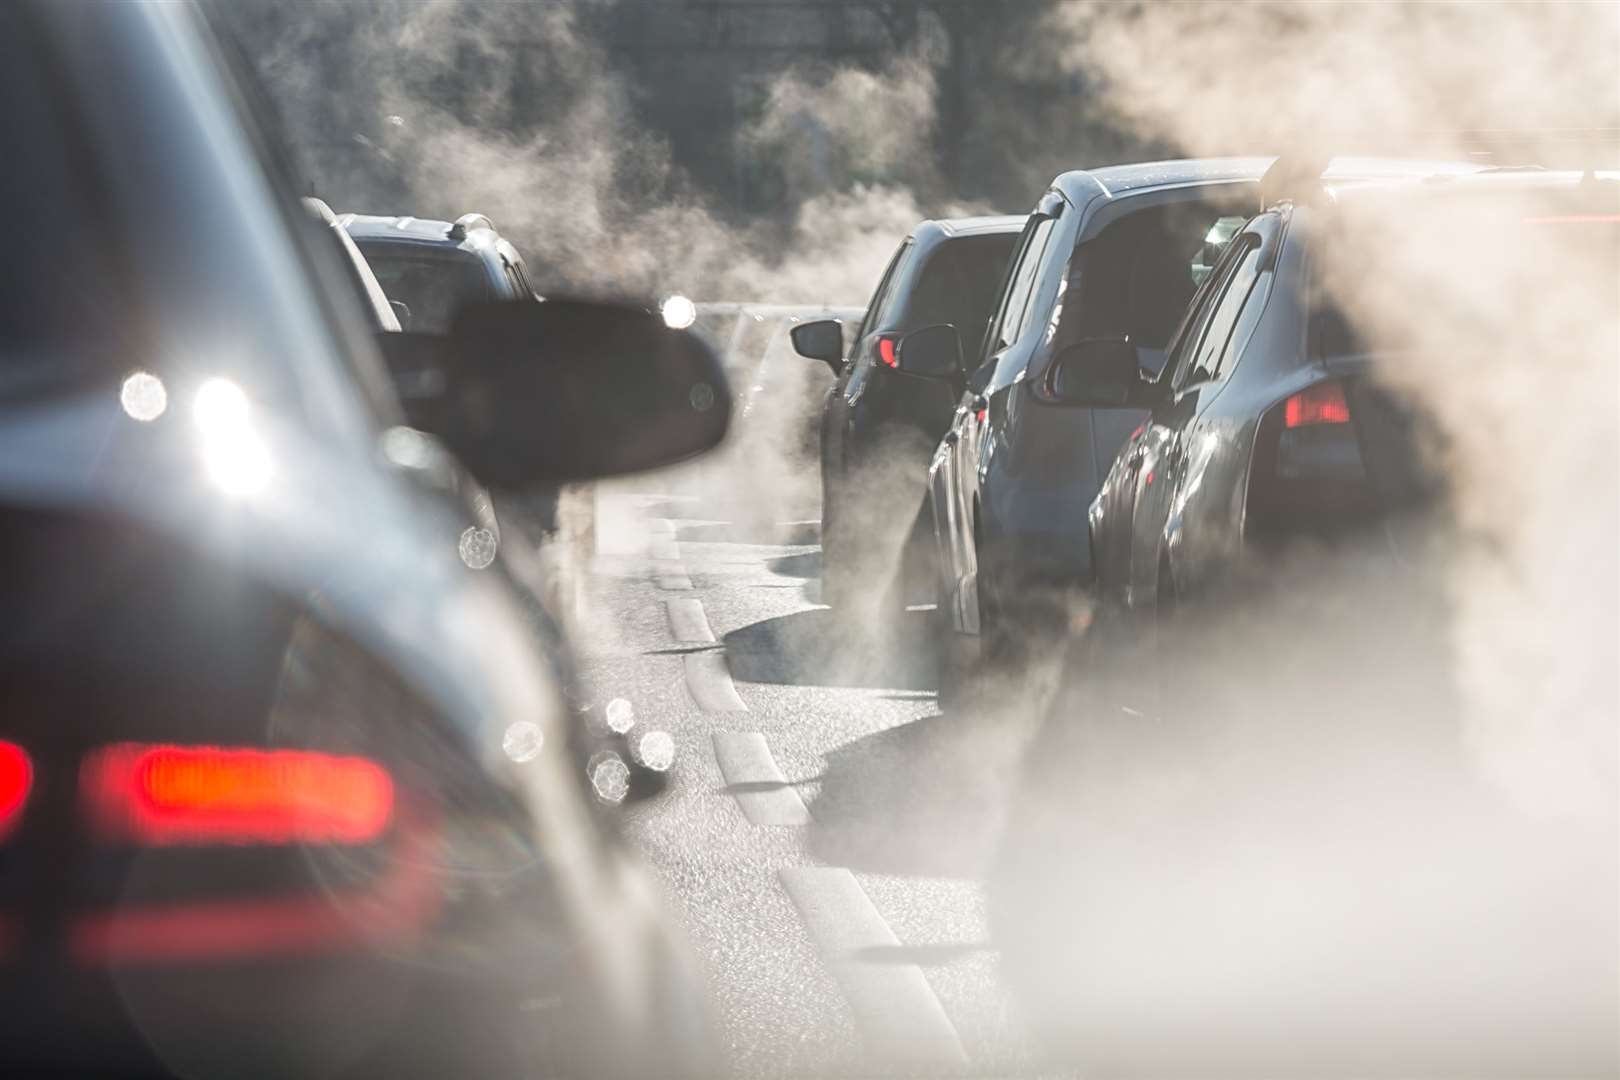 Friends of the Earth believe more needs to be done to cut down emissions from cars